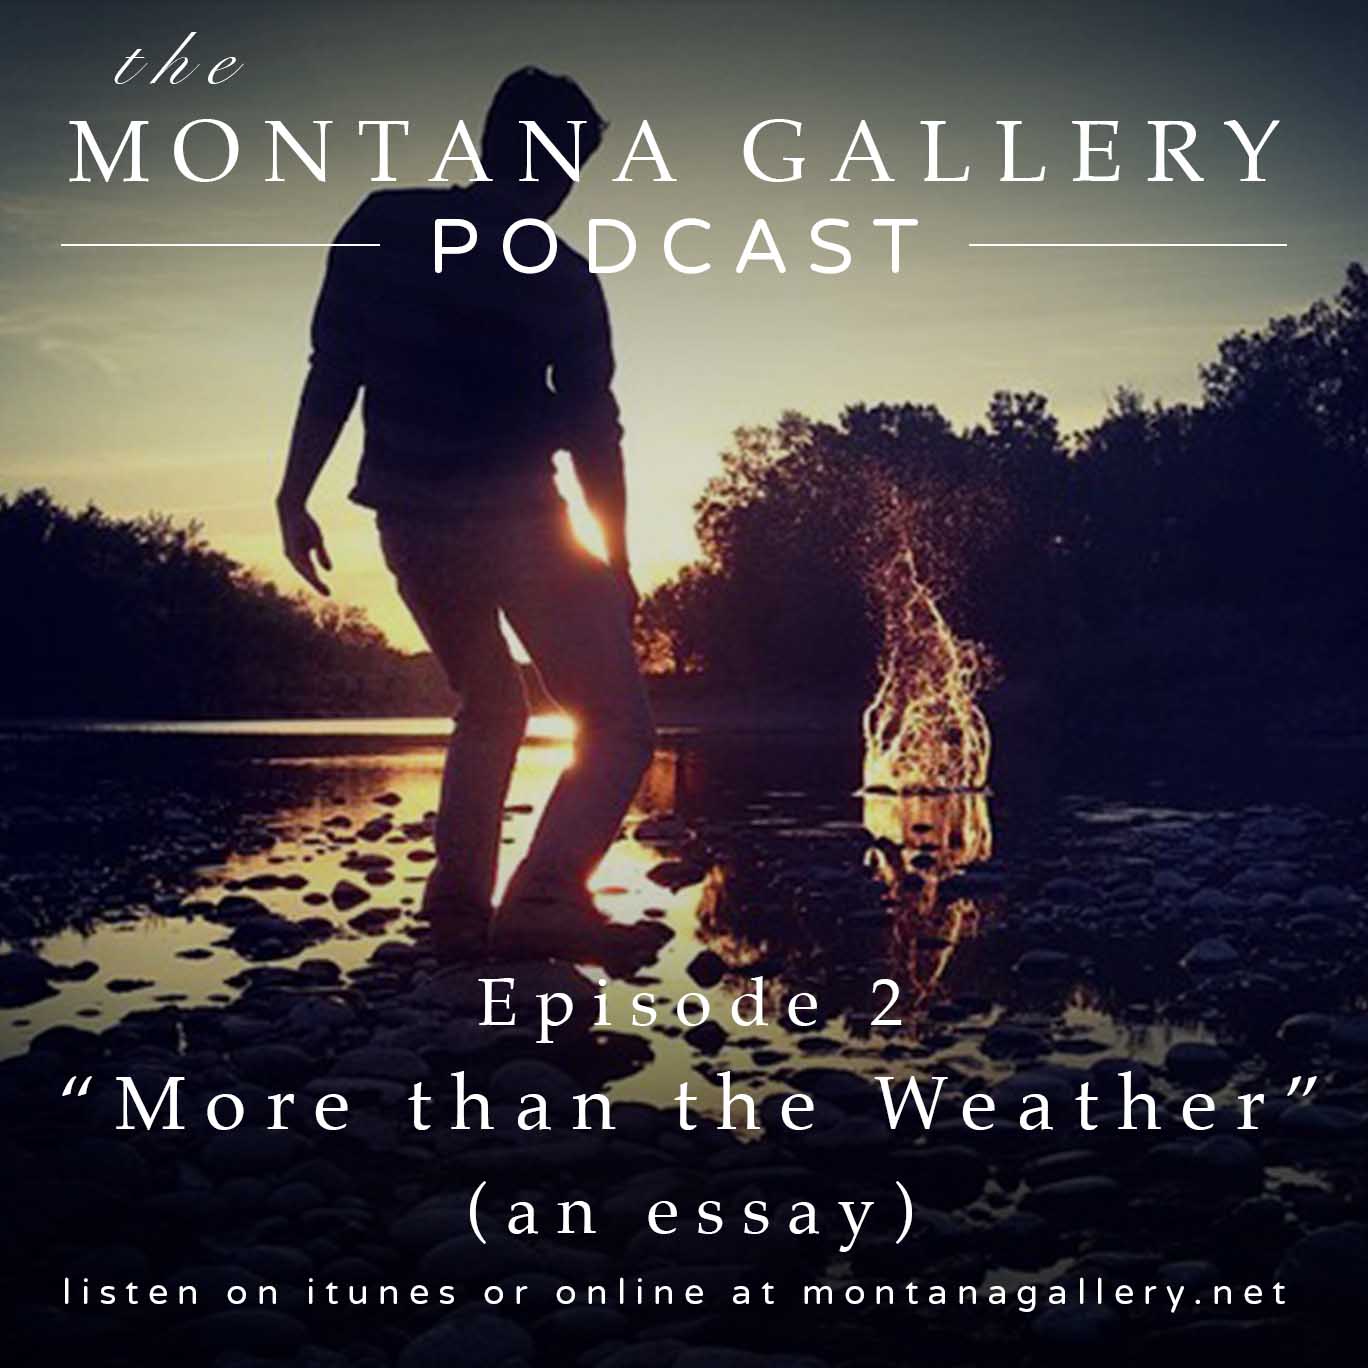 Episode 2: More than the Weather